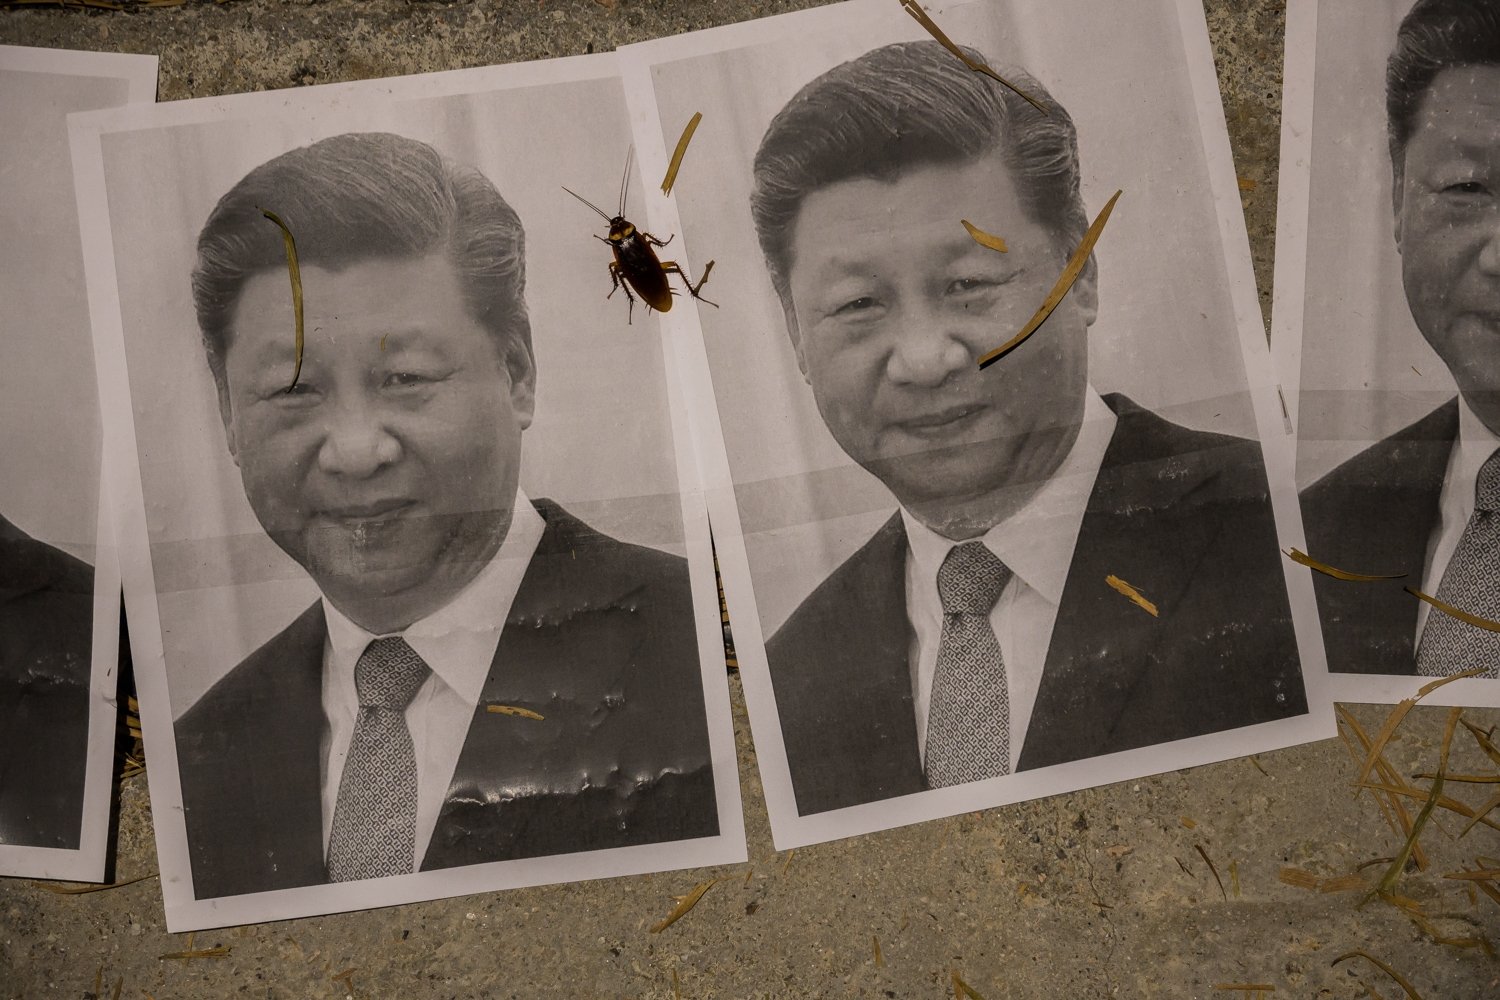 Posters of Xi Jinping are seen during a rally that supports two imprisoned Uyghur professors and the Hong Kong anti extradition bill movement, at the Chinese University of Hong Kong, Hong Kong, China, Sept. 25, 2019. (Getty Images)